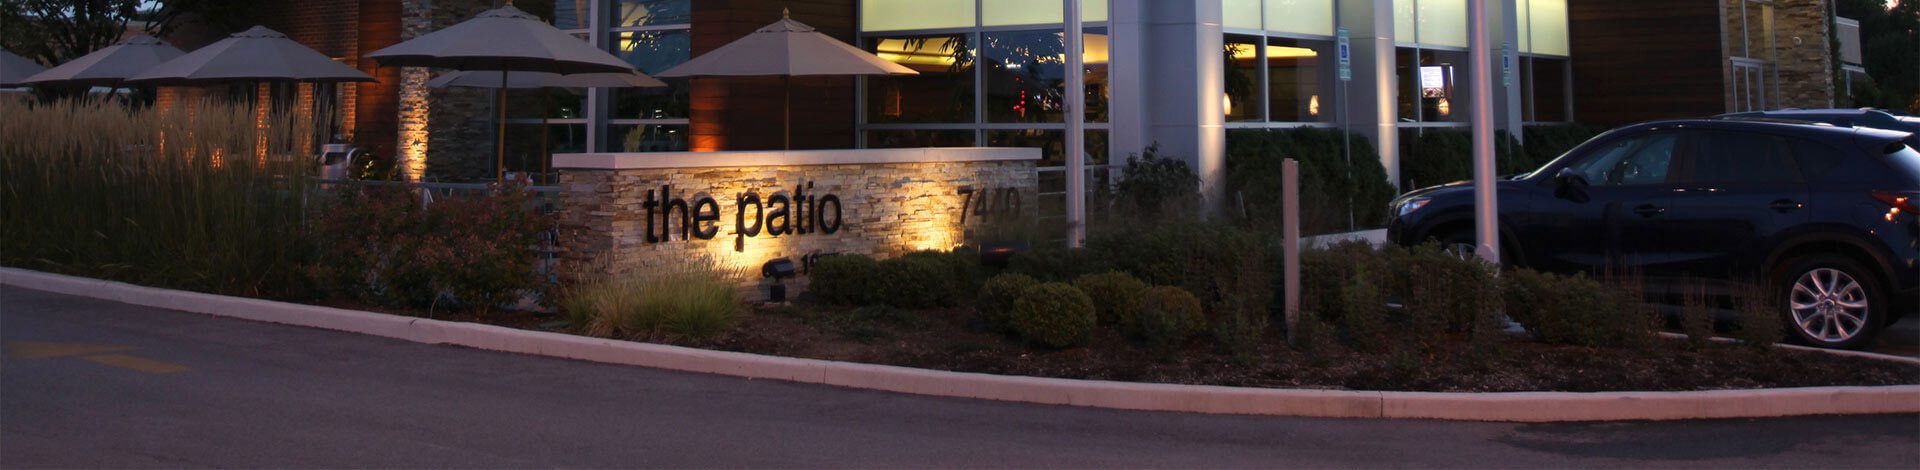 The Patio restaurant building with a light up sign.